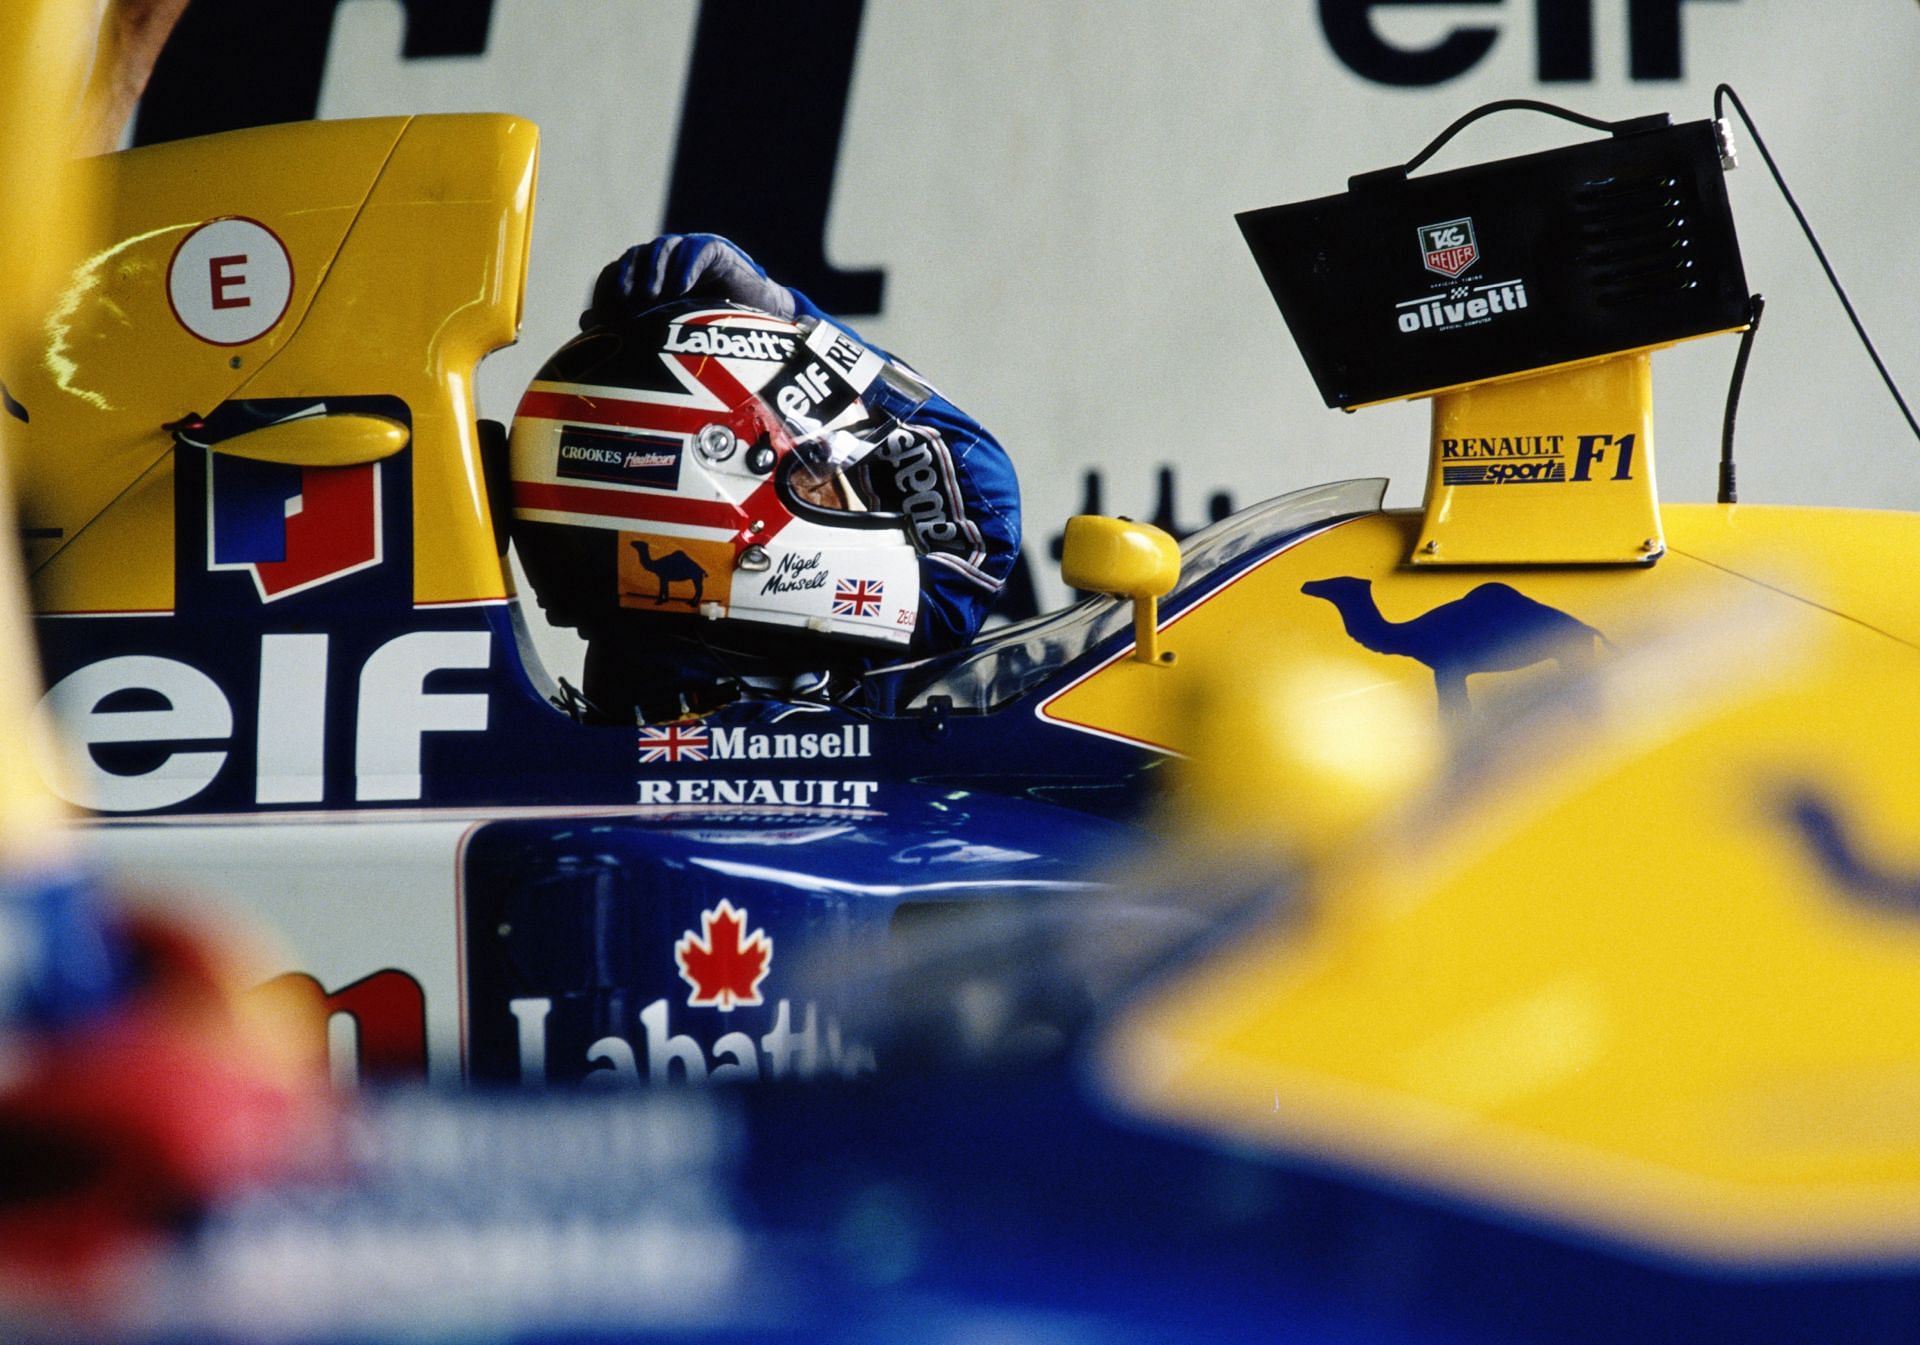 Nigel Mansell at Silverstone in 1991 (Photo by Darrell Ingham/Getty Images)